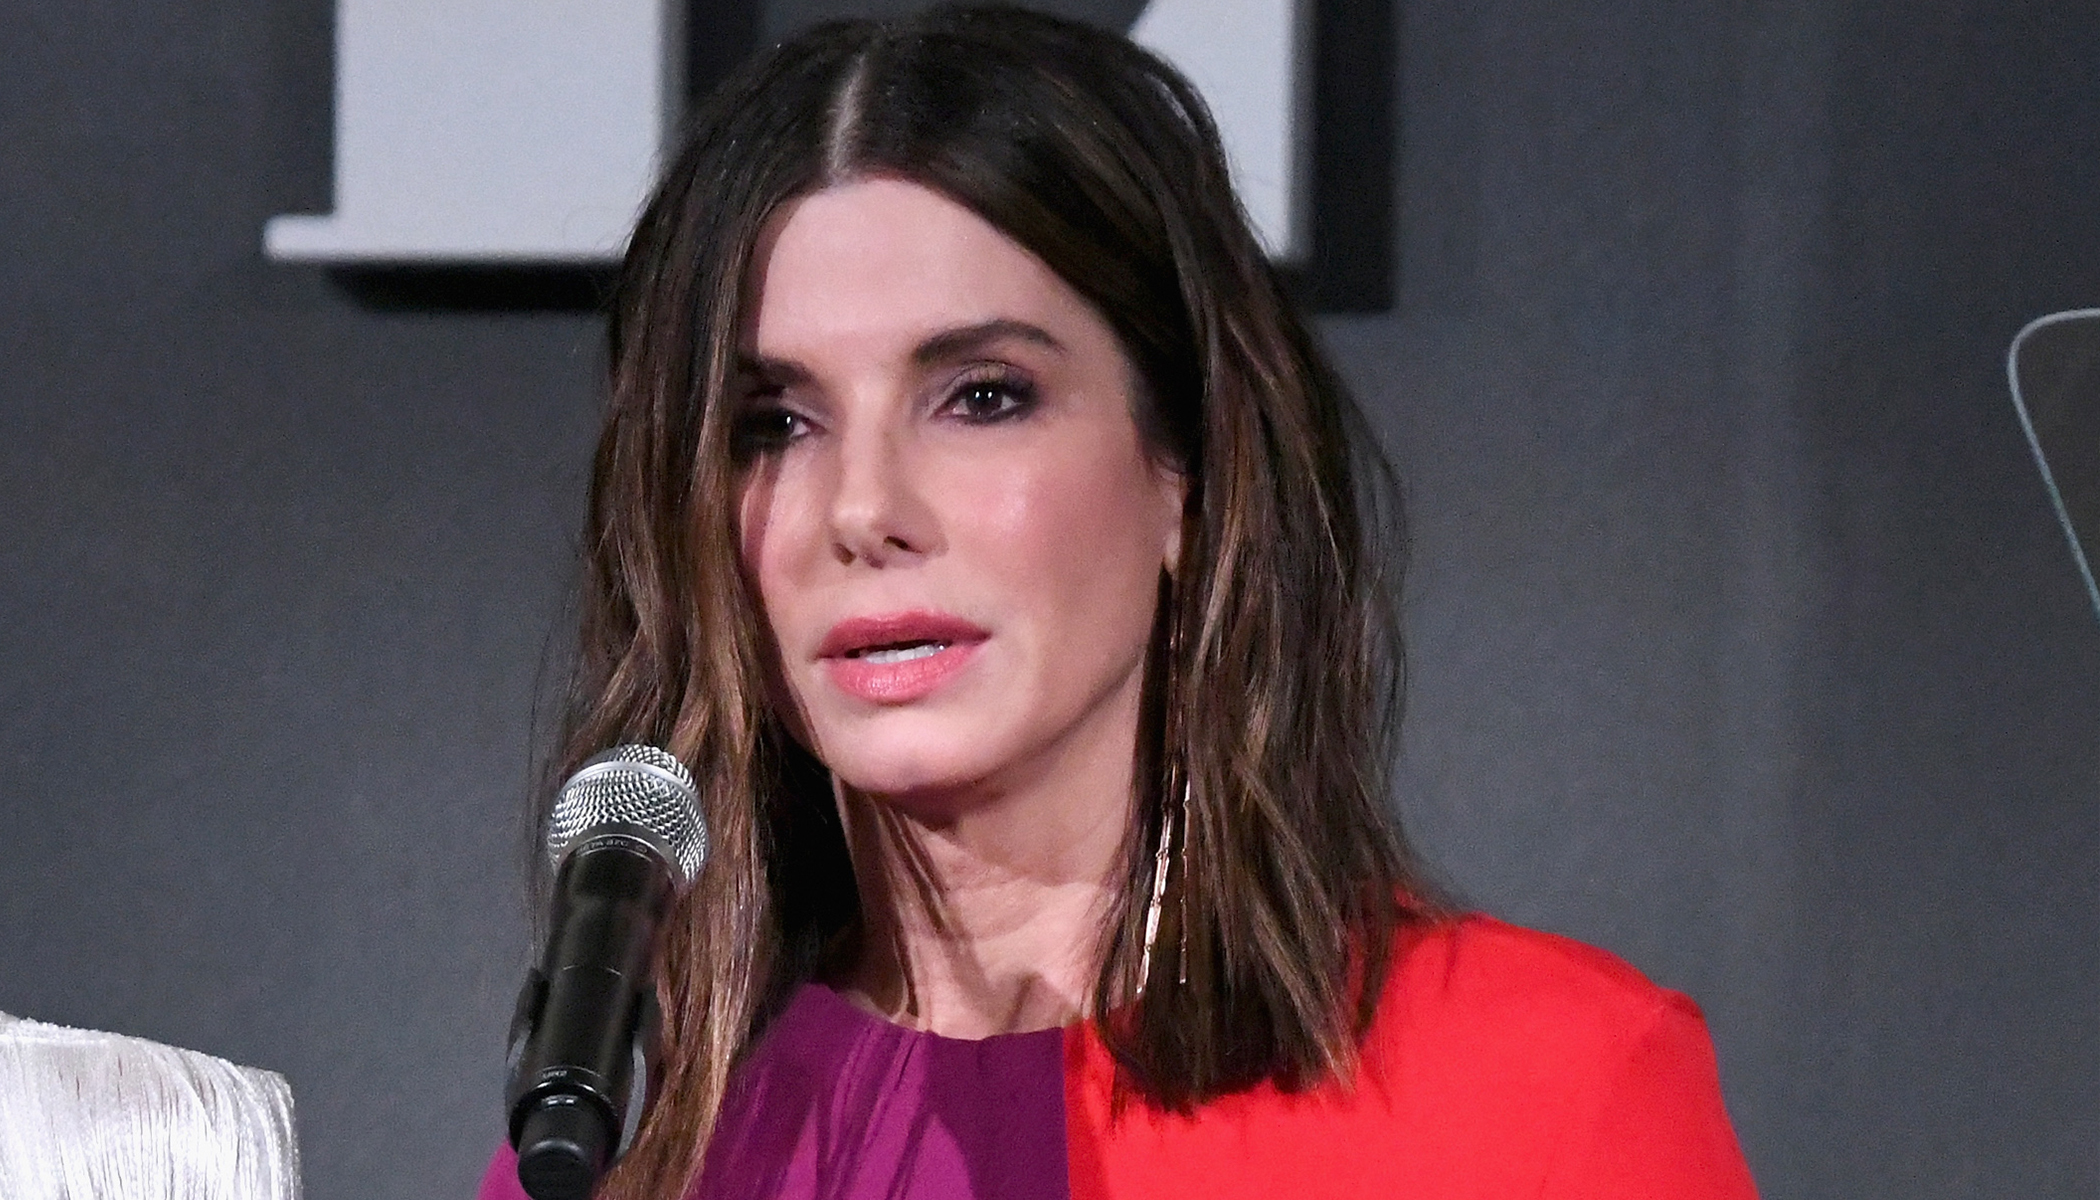 The beauty of the most beautiful woman in the world Sandra Bullock at the age of 56 13